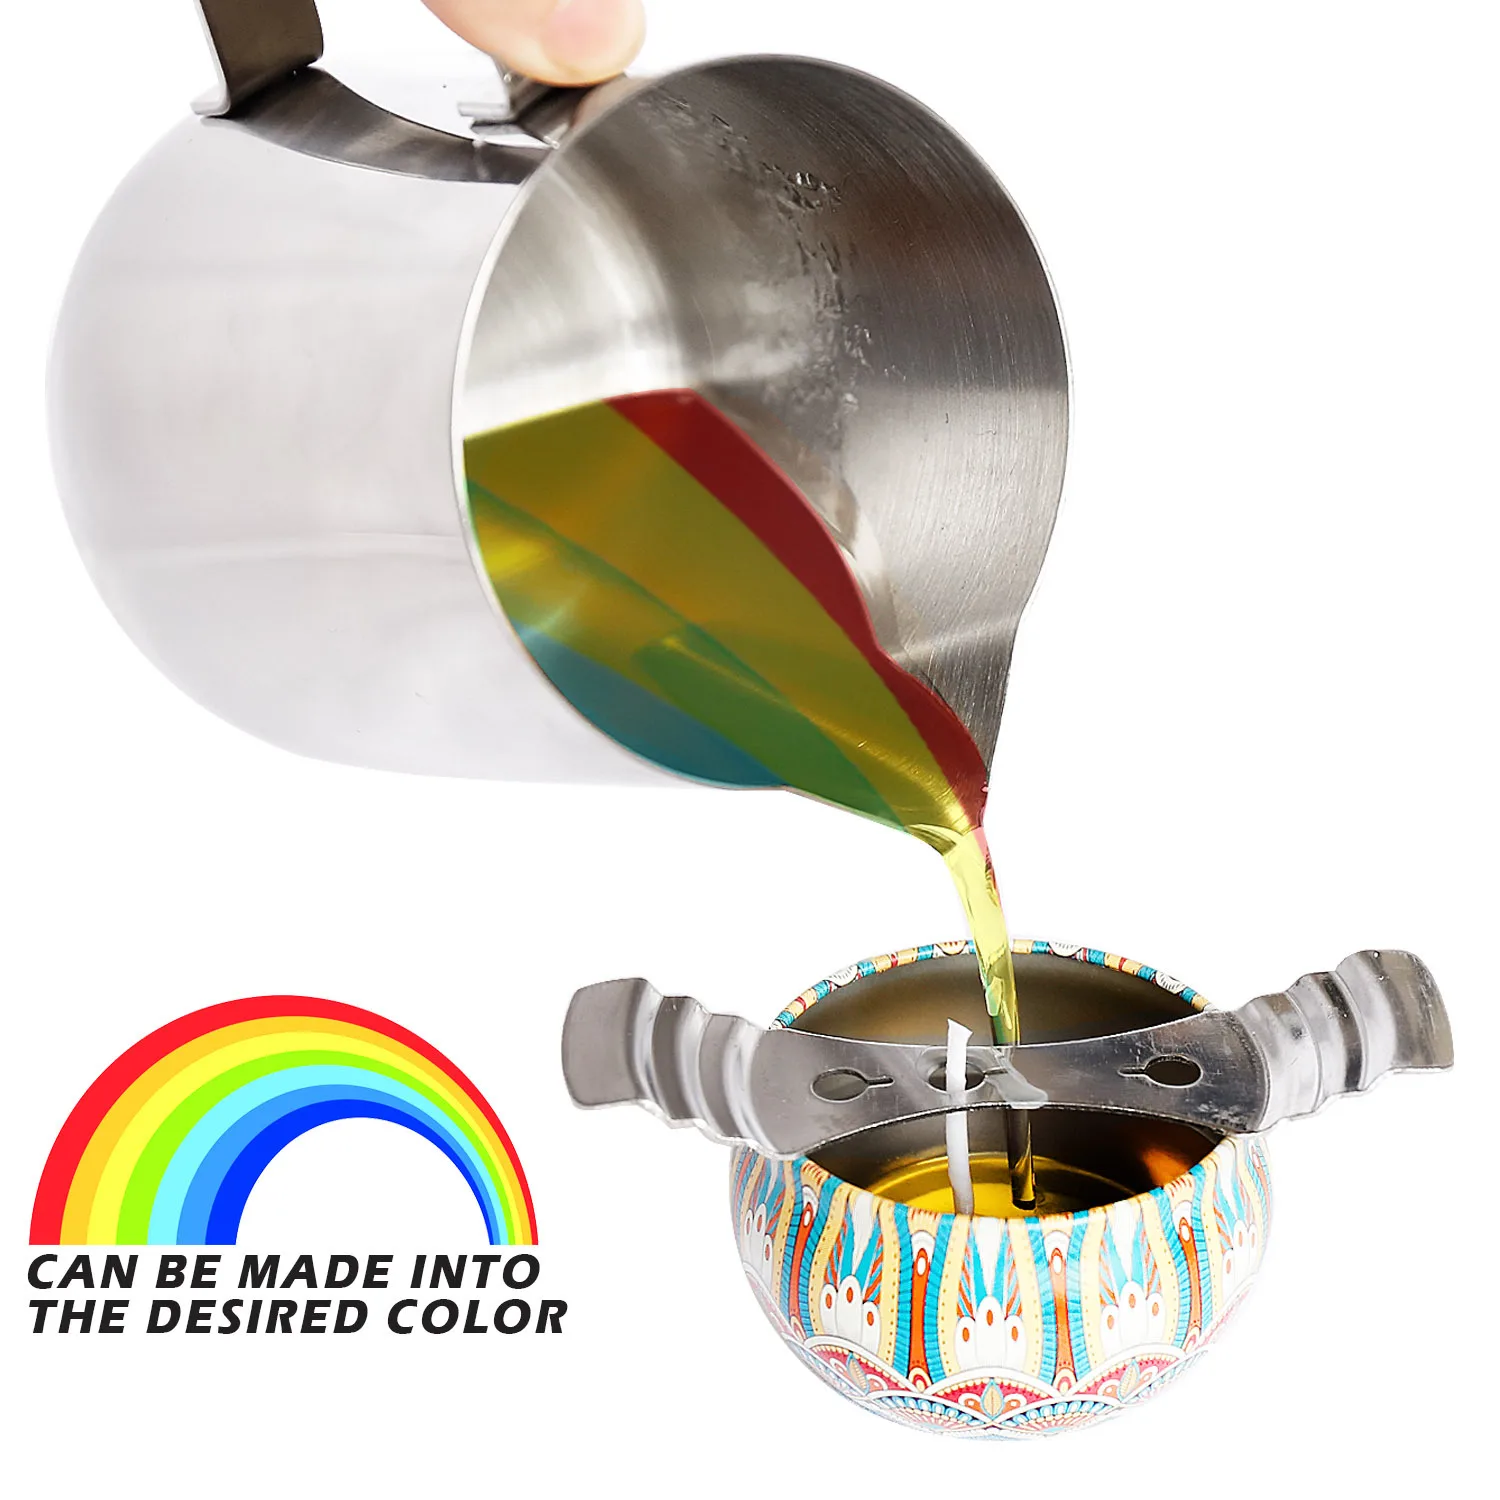 Rainbow Colors Beeswax Candle Making Kit